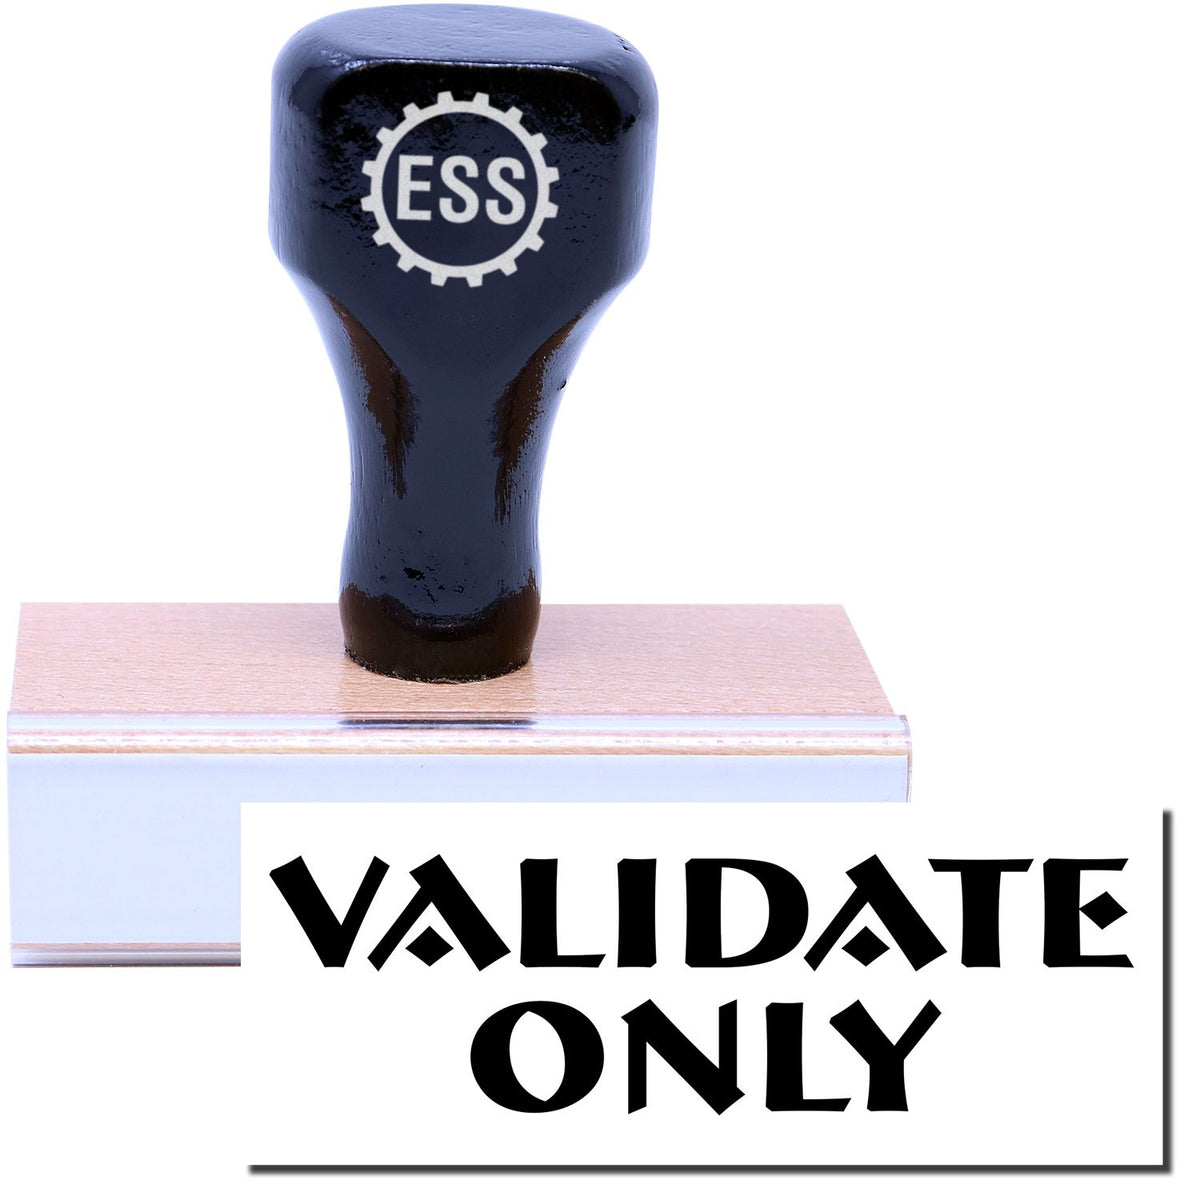 A stock office rubber stamp with a stamped image showing how the text &quot;VALIDATE ONLY&quot; in a large font is displayed after stamping.